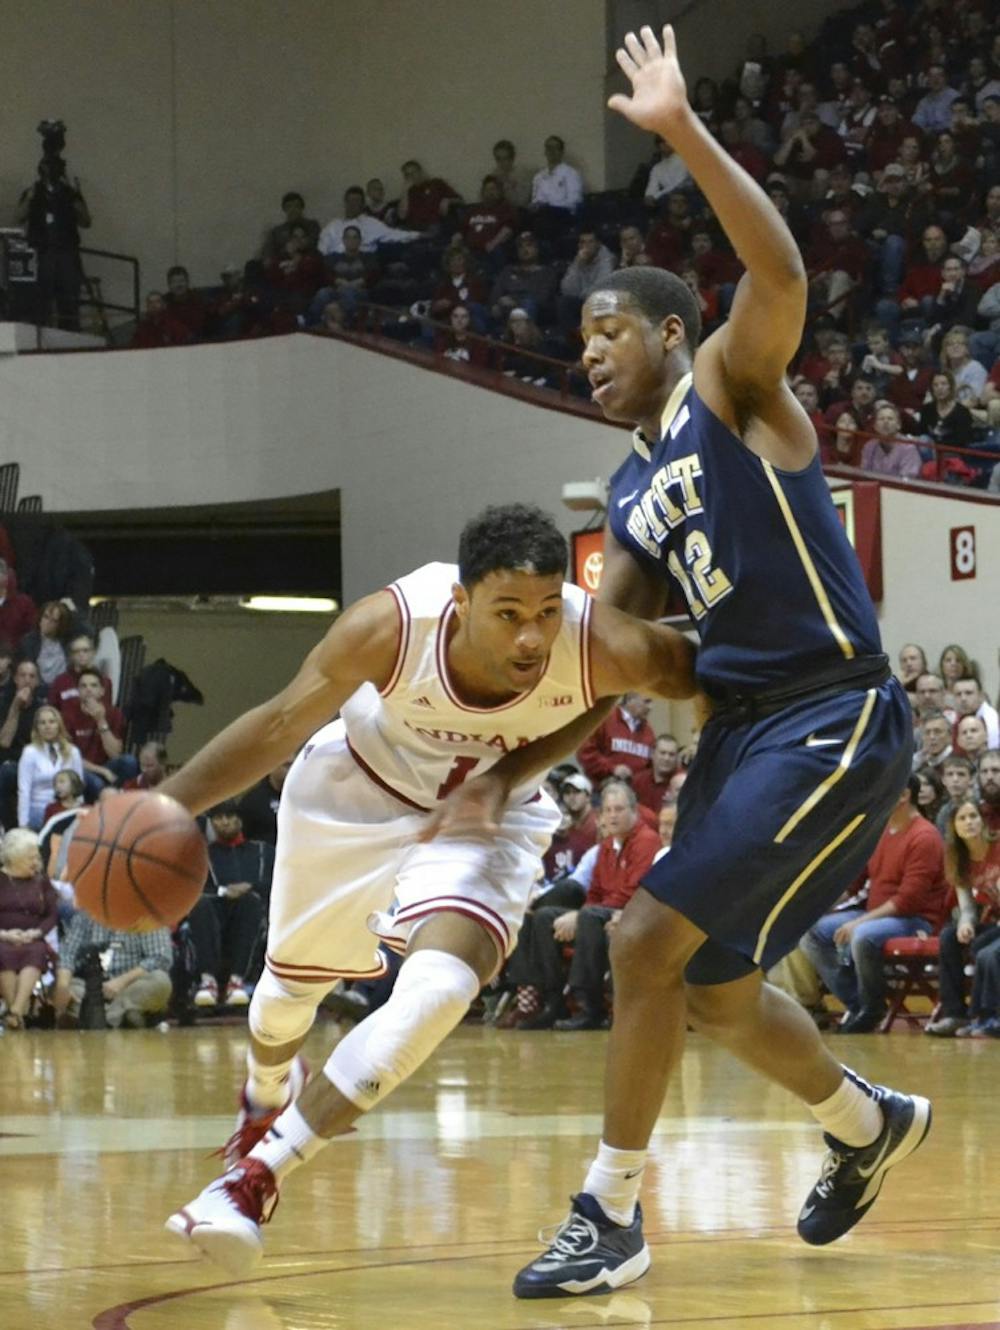 Freshman James Blackmon Jr. drives past his opponent during IU's game against Pittsburgh on Tuesday at Assembly Hall.